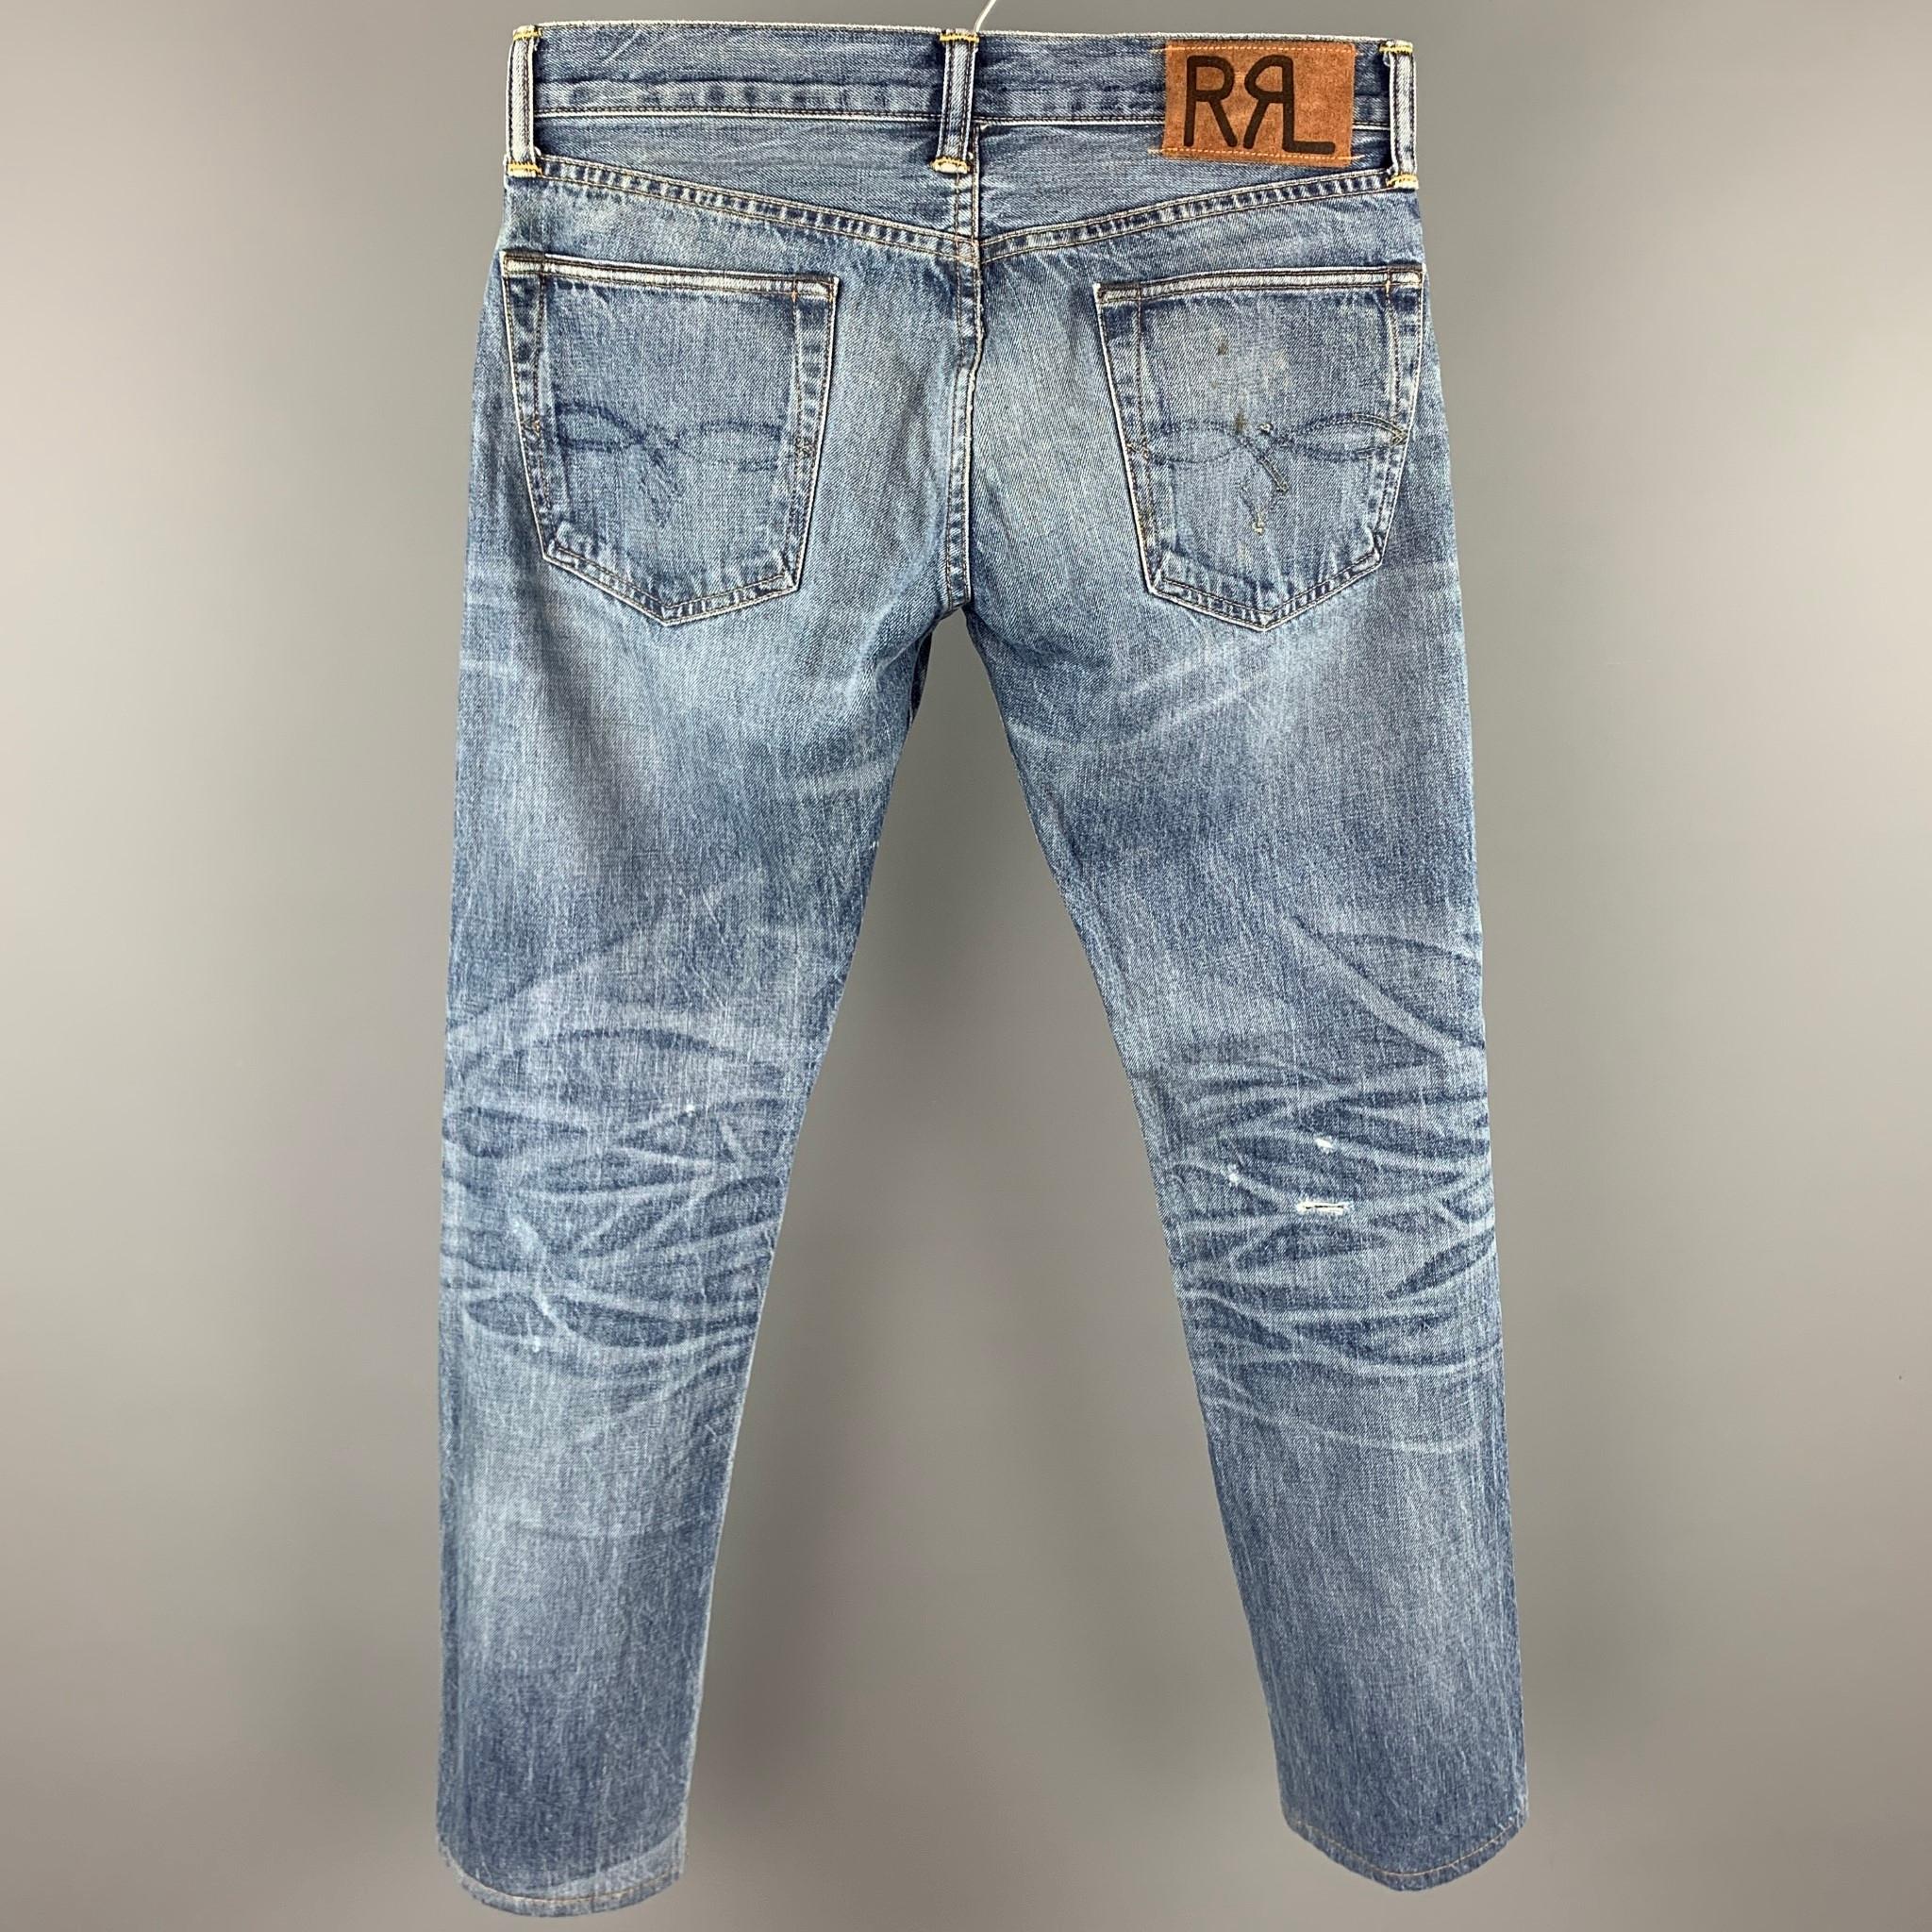 RRL by RALPH LAUREN jeans comes in a light blue washed selvedge denim featuring a low straight fit, distressed, contrast stitching, and a button fly closure. Made in USA.

Good Pre-Owned Condition.
Marked: 28x32

Measurements:

Waist: 30 in.
Rise: